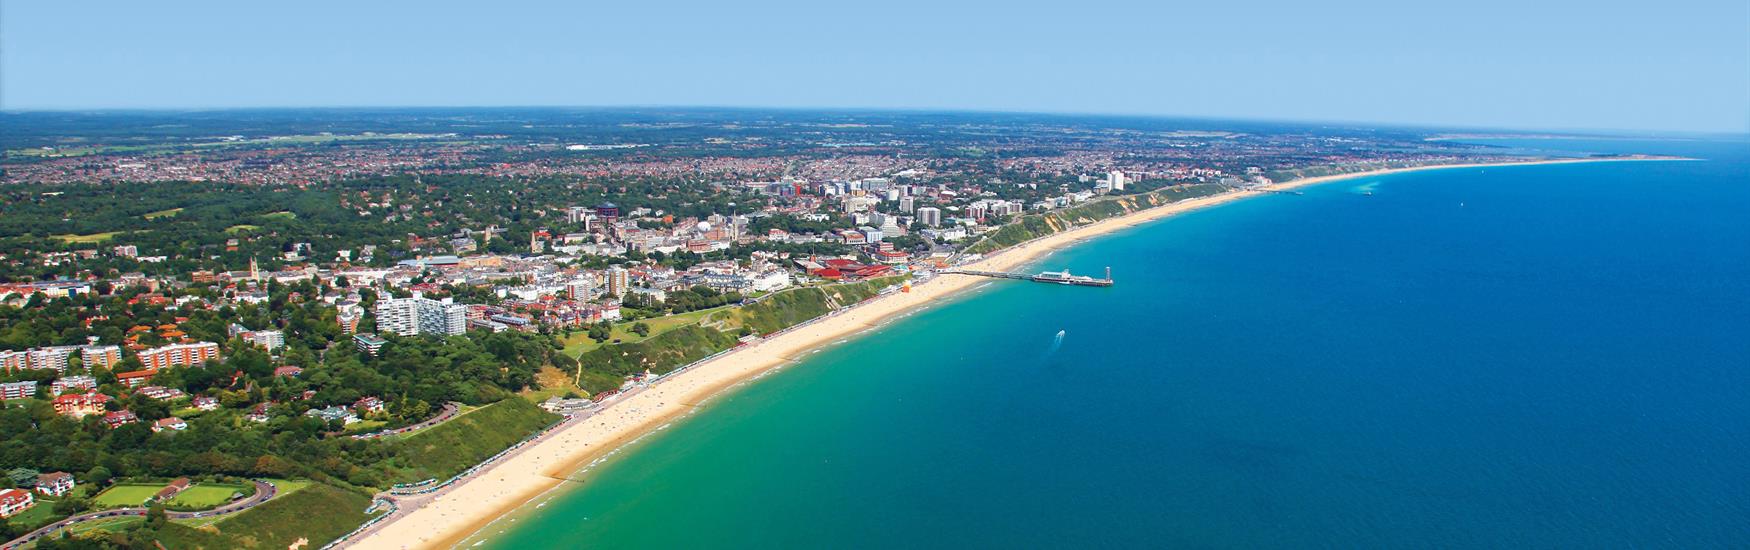 Sweeping shot of Bournemouth from the Air Turquoise Sea Bay